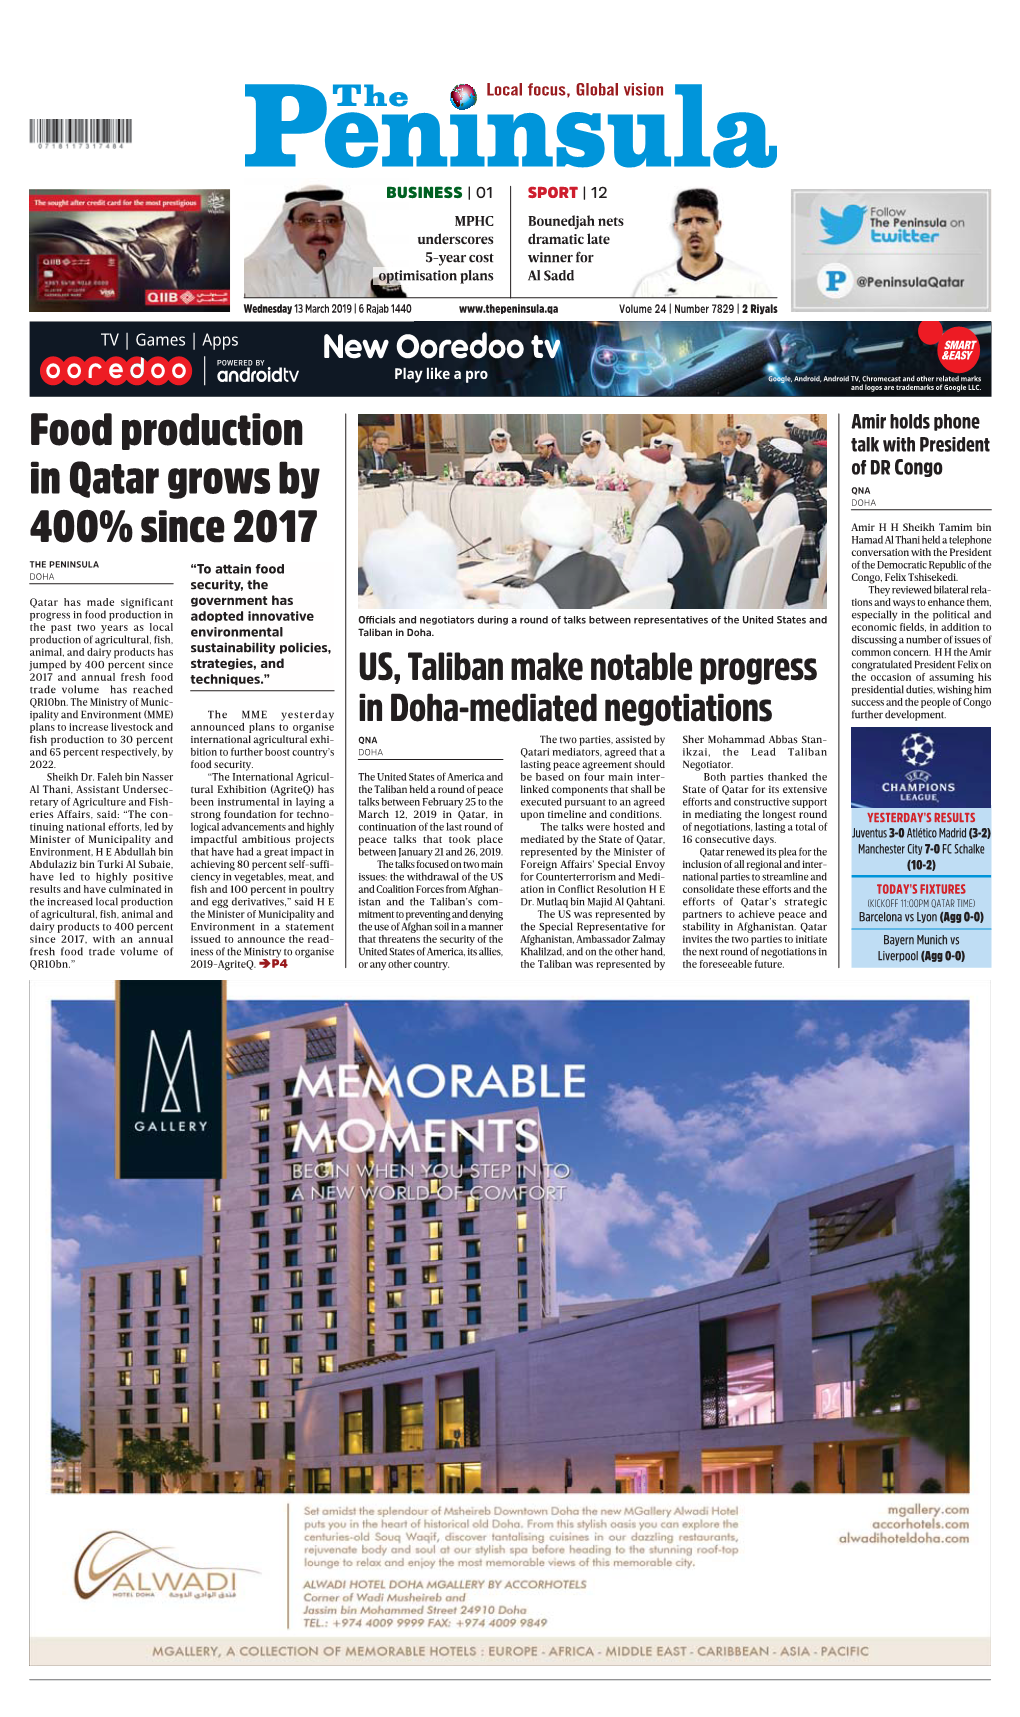 Food Production in Qatar Grows by 400% Since 2017